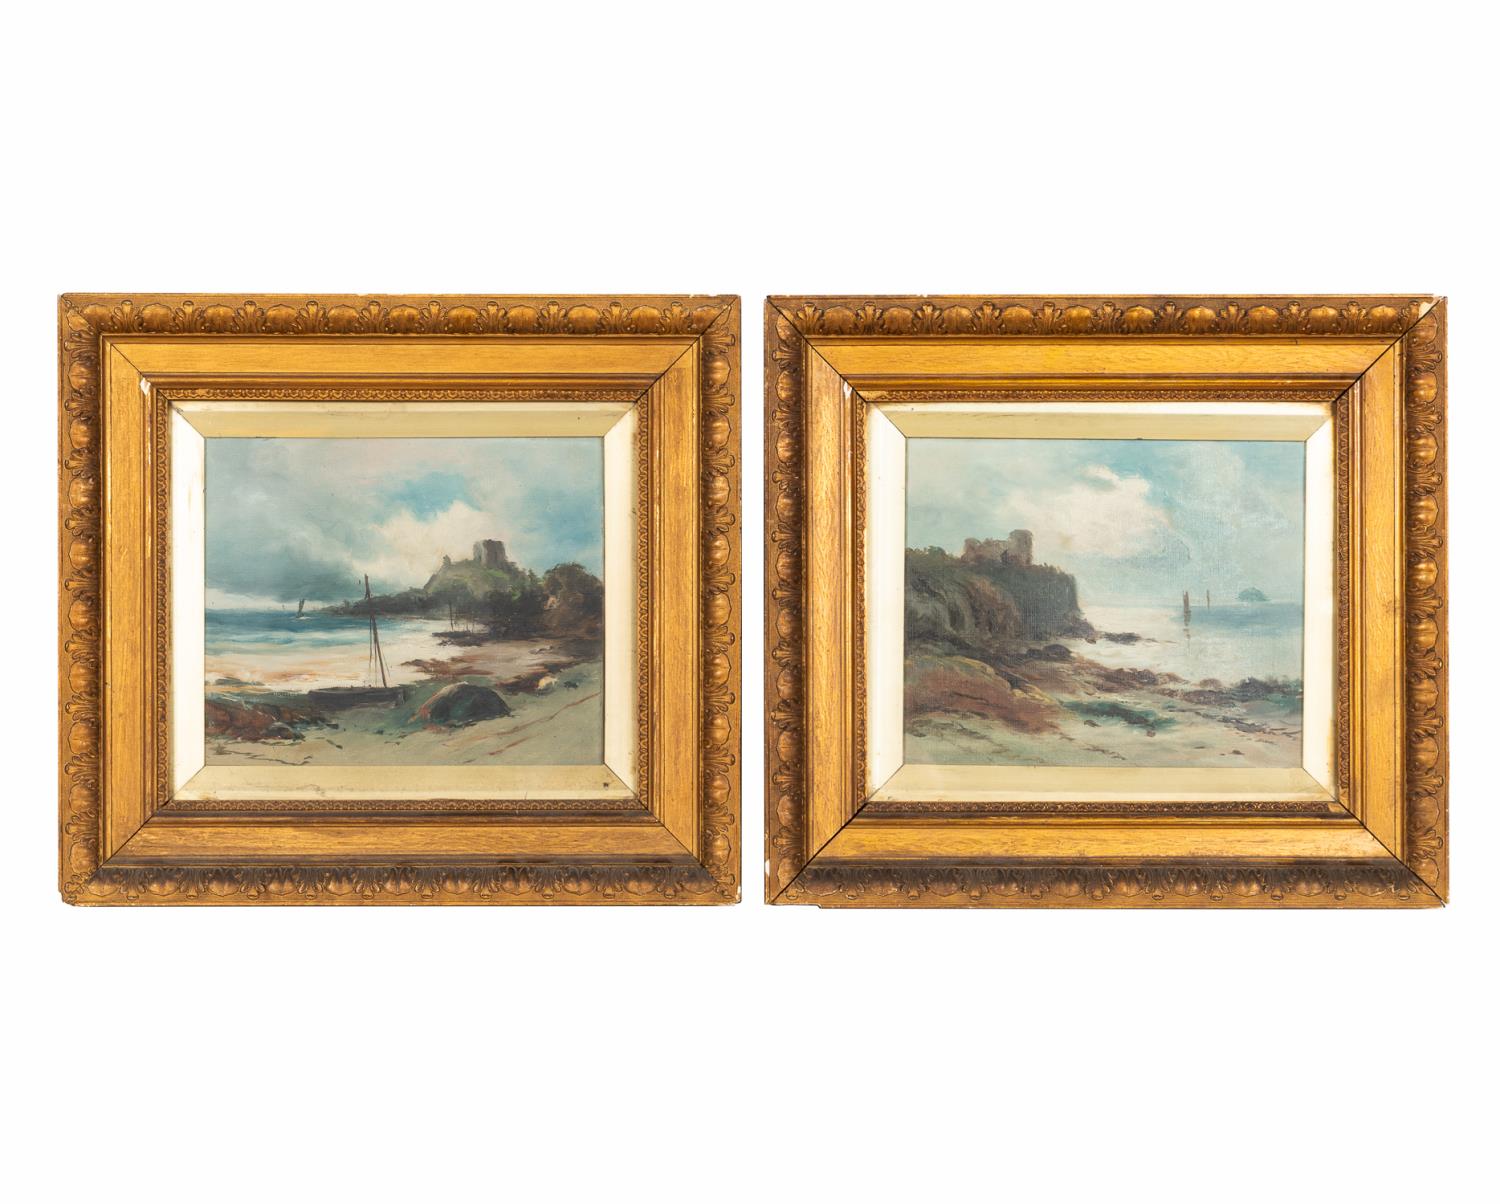 19TH C. PAIR OF SEASCAPES WITH